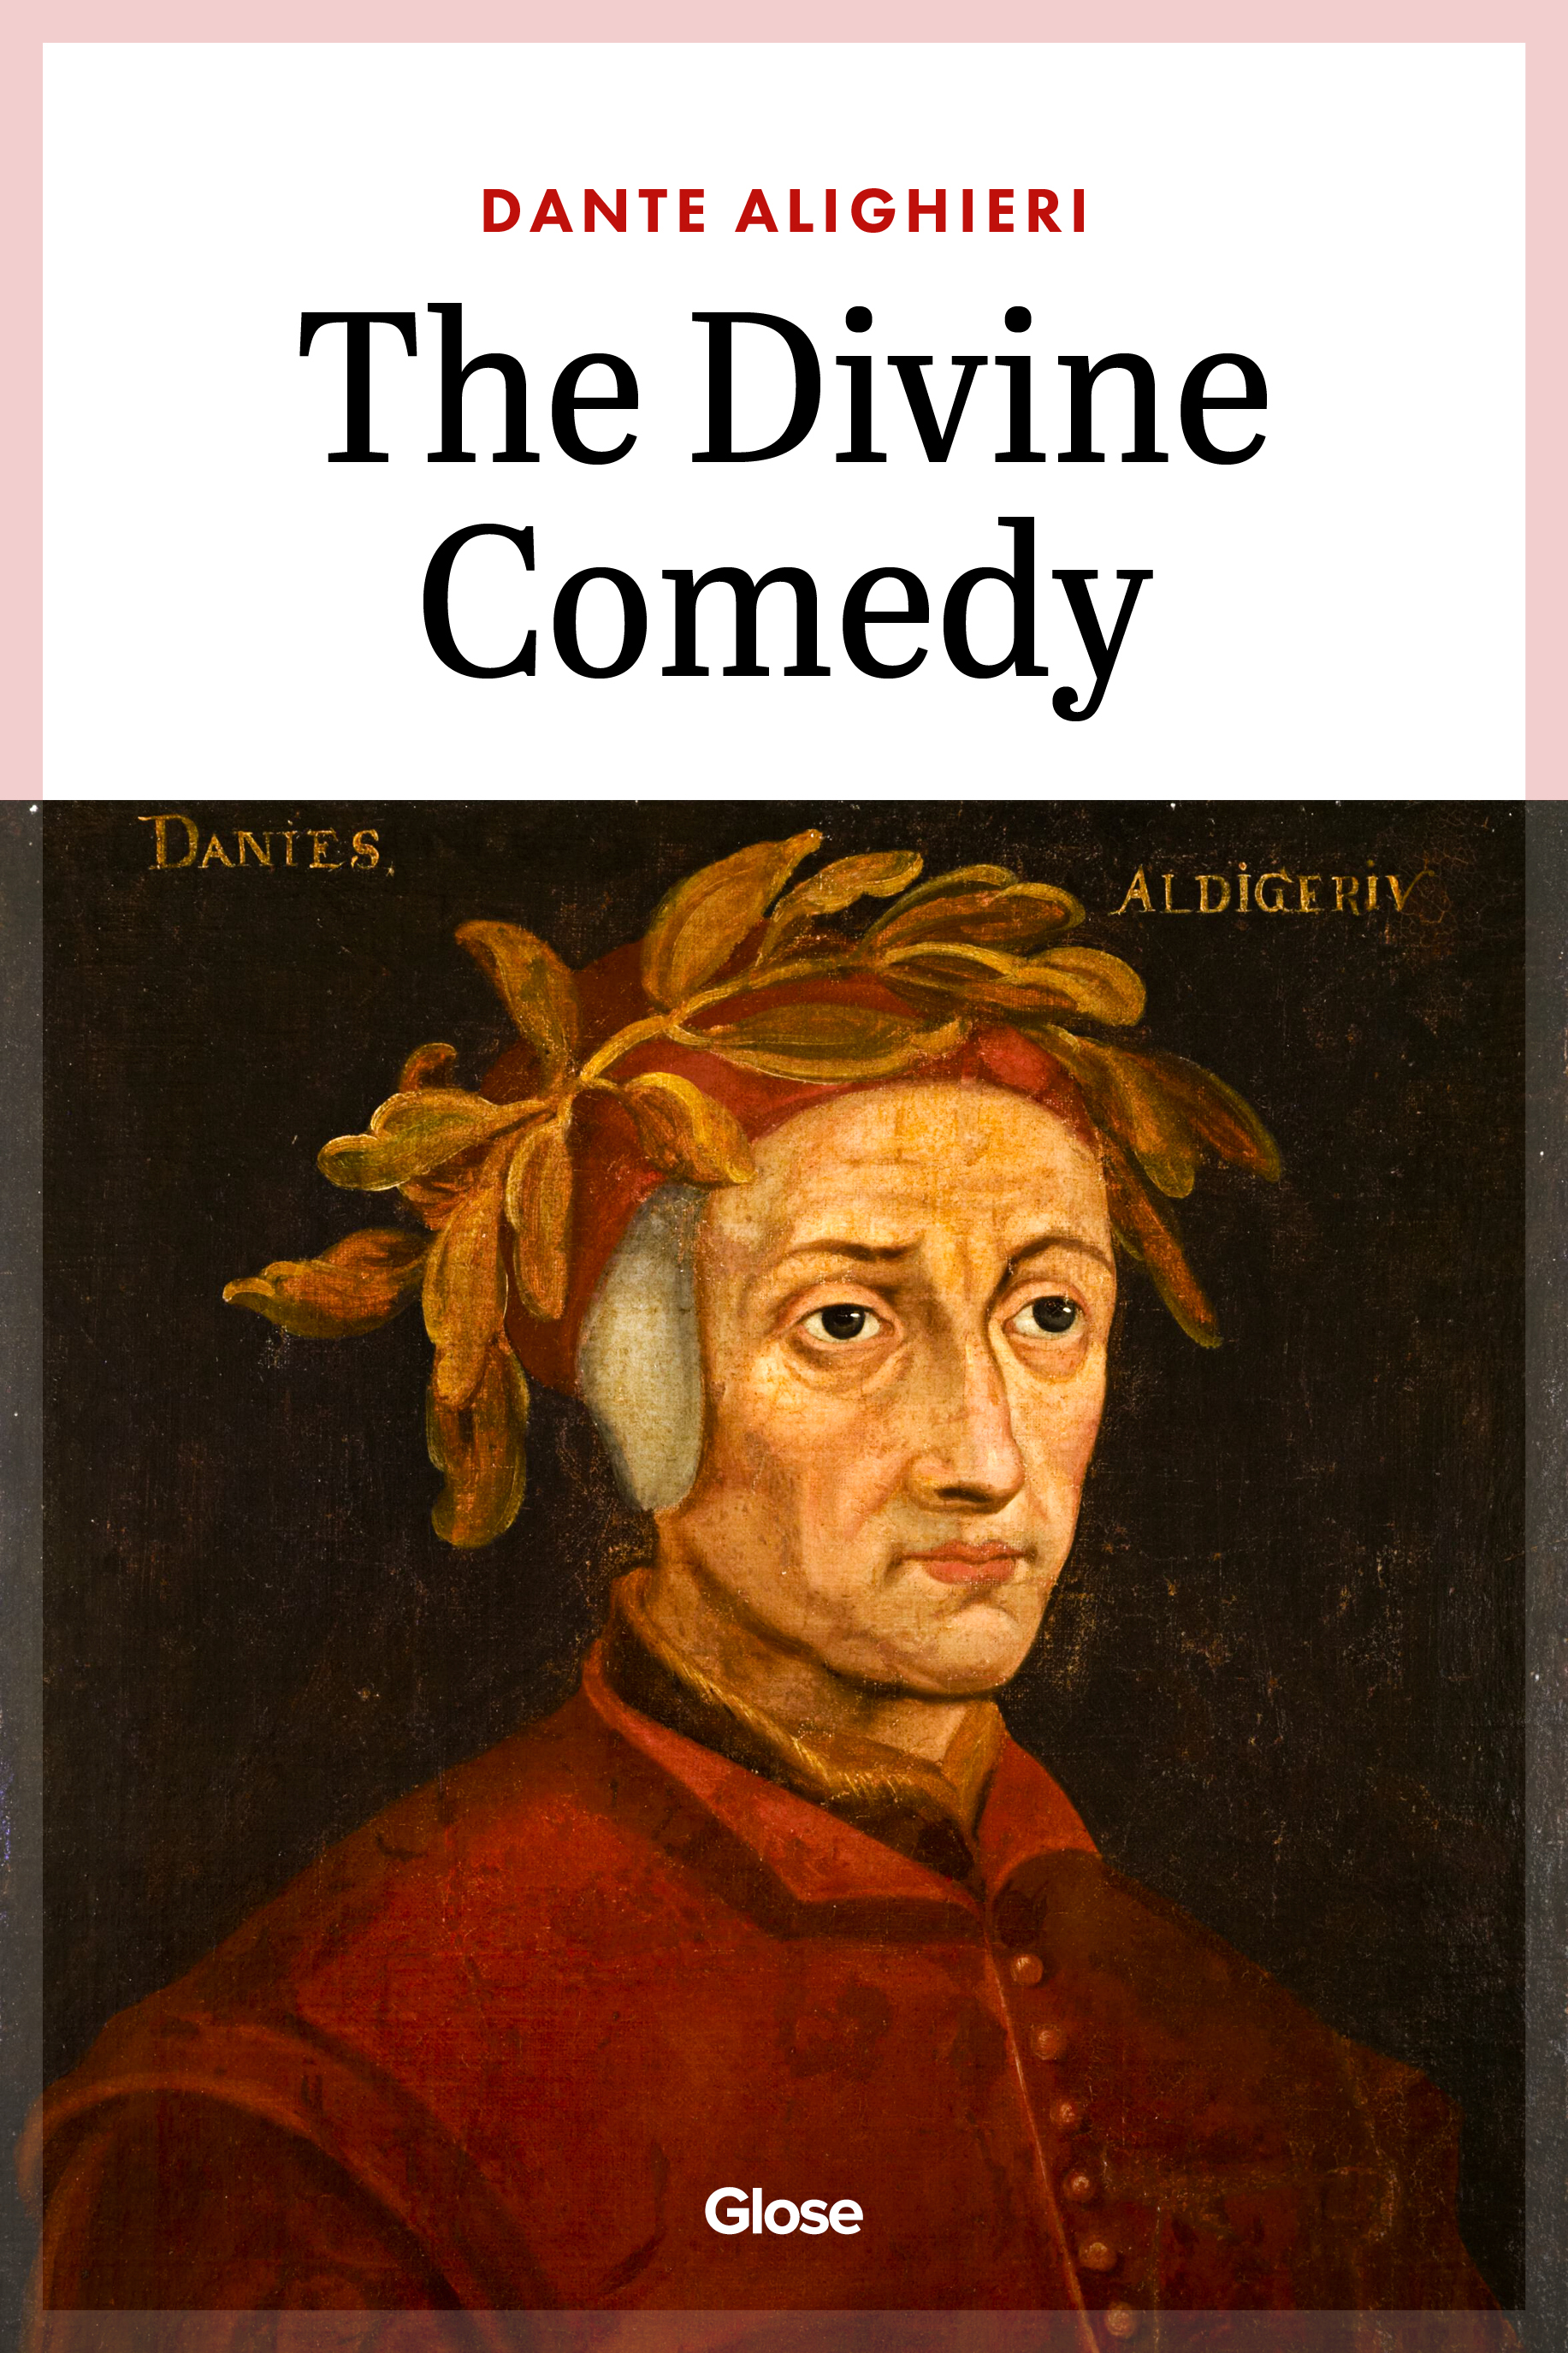 The Inferno by Dante Alighieri - Read on Glose